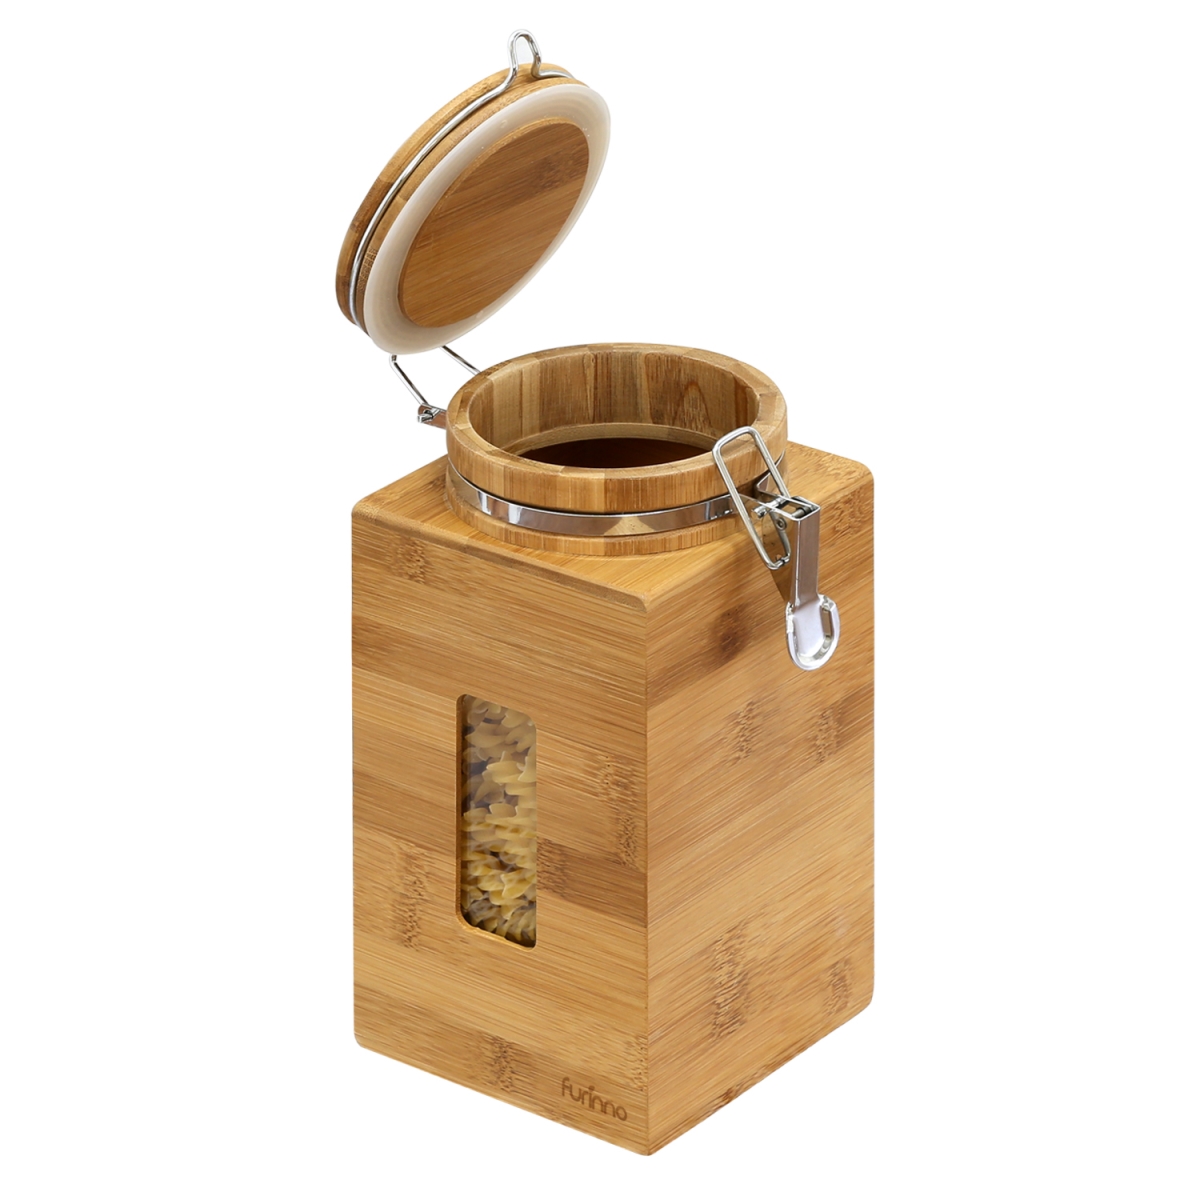 Fk8960 Dapur Bamboo Tight Canister - 1.9 Lbs